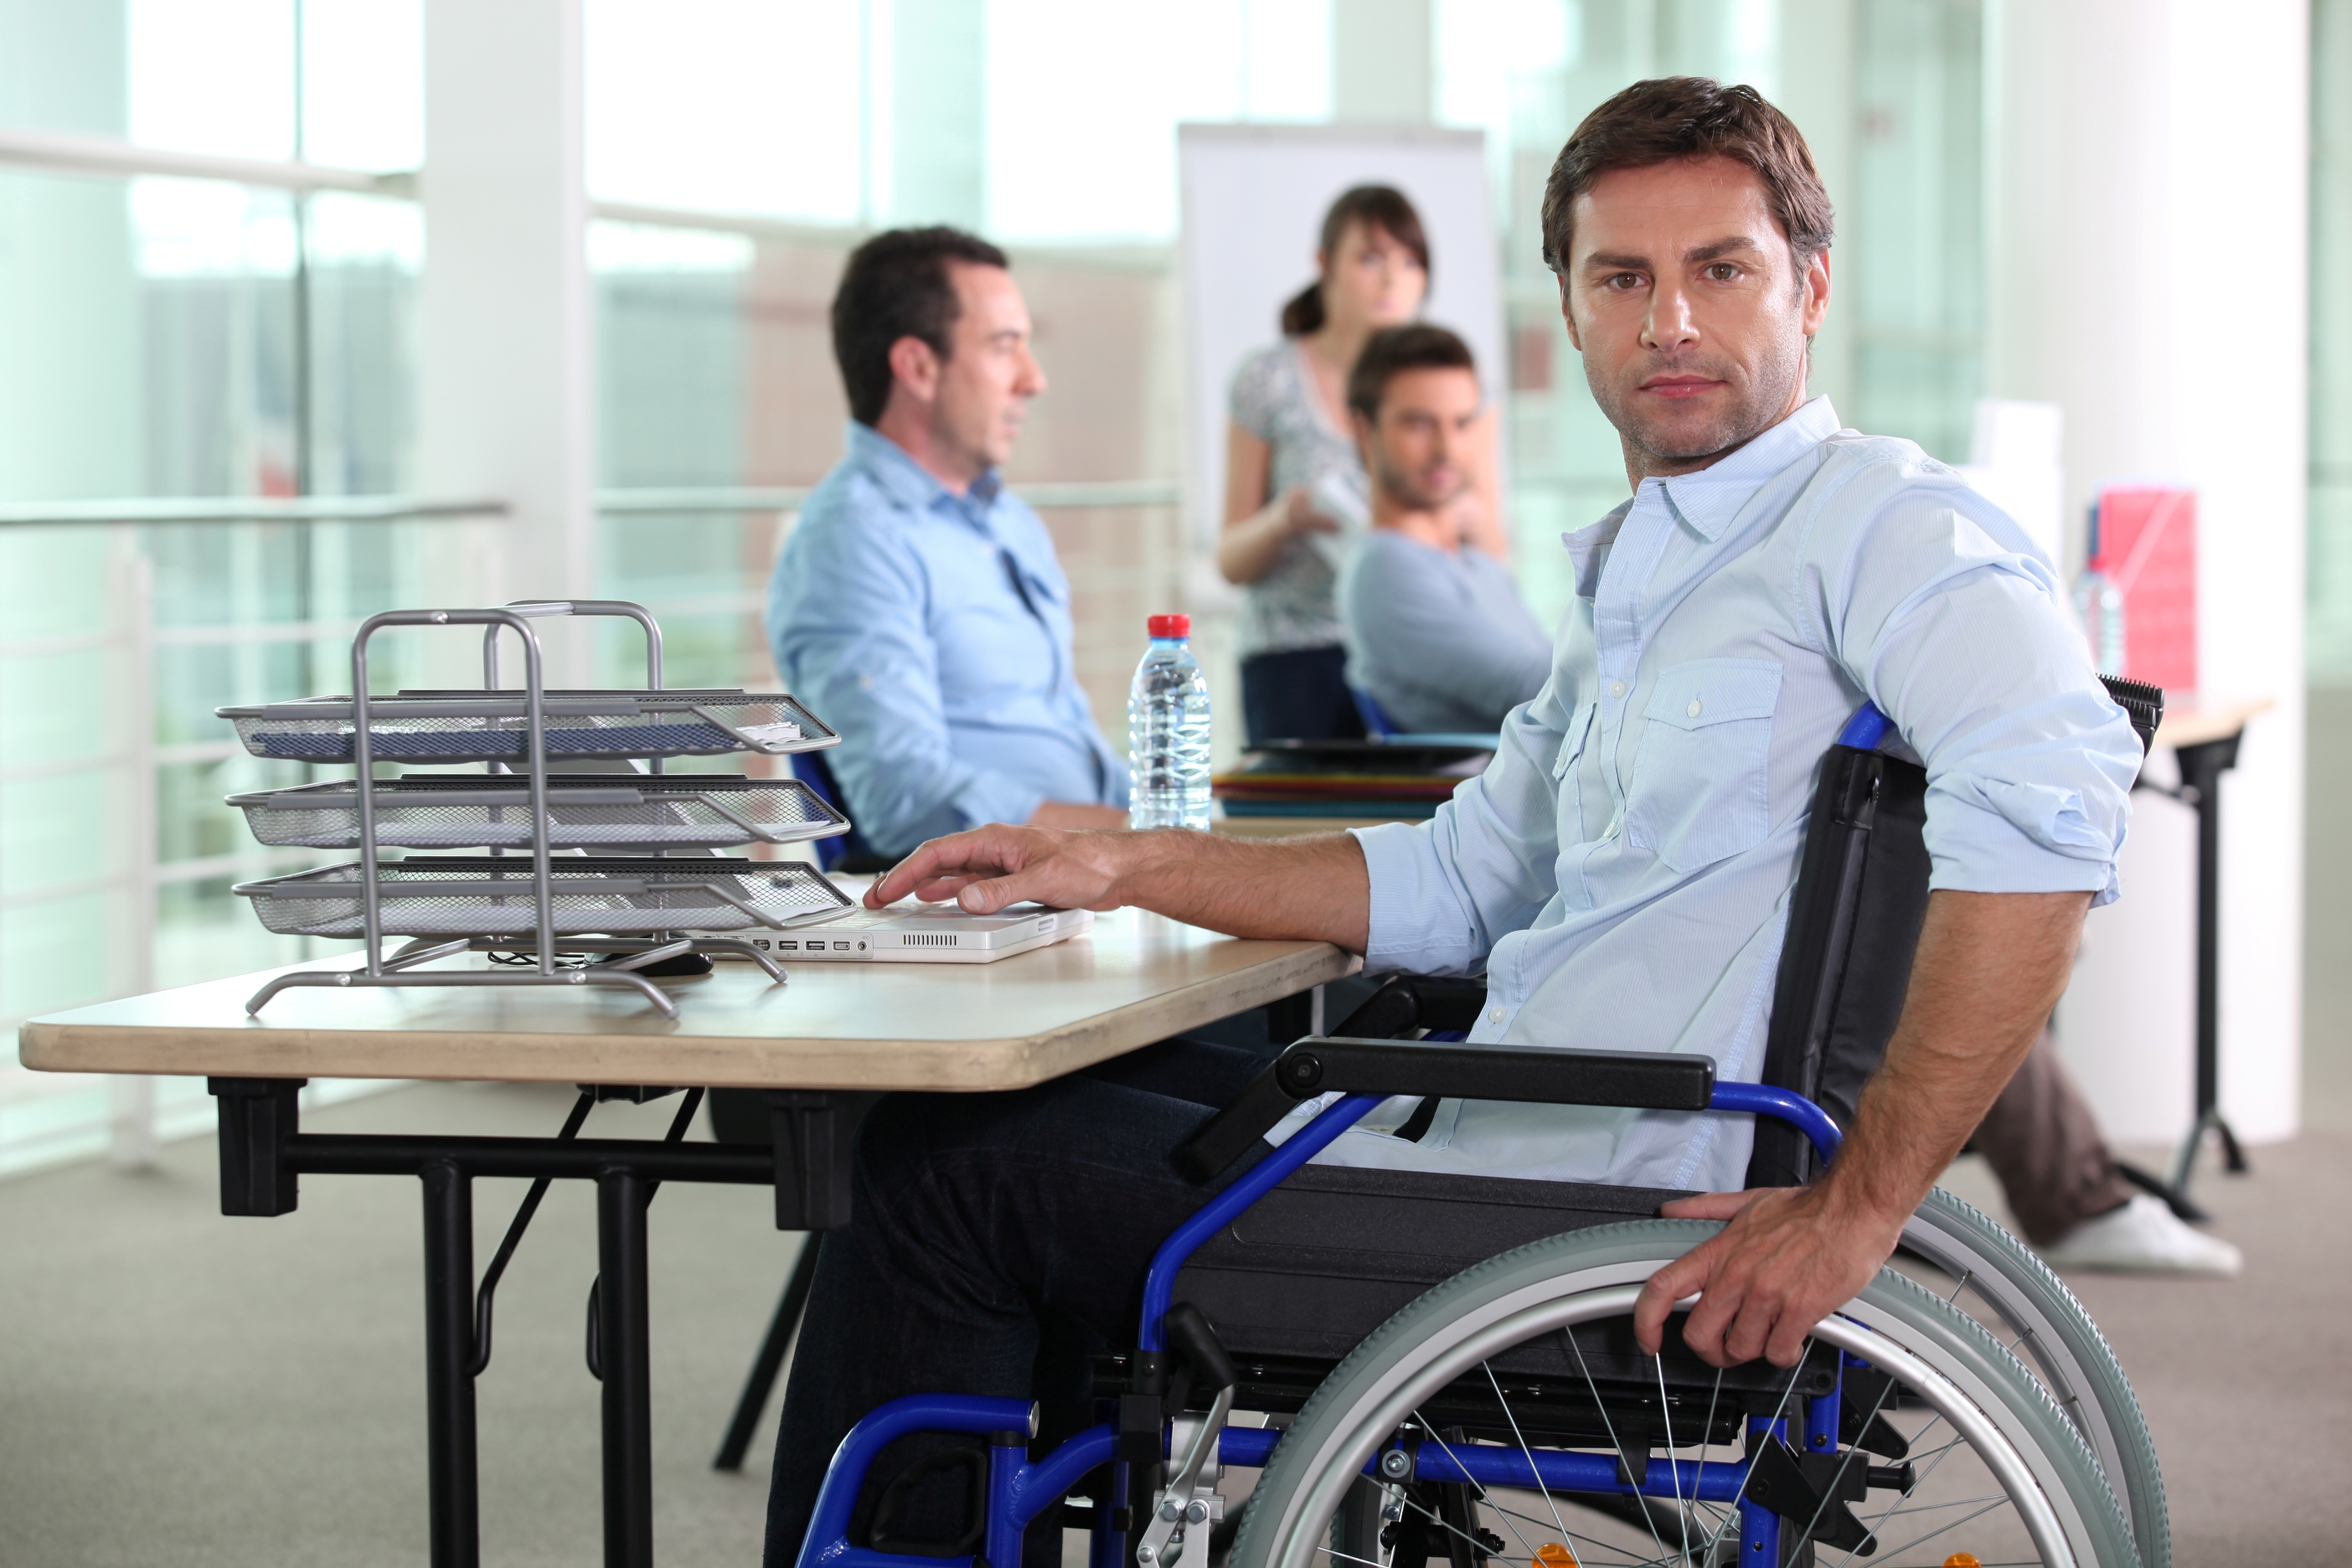 Image shows a man in a wheelchair, at a desk with his laptop, papers, and co-workers.